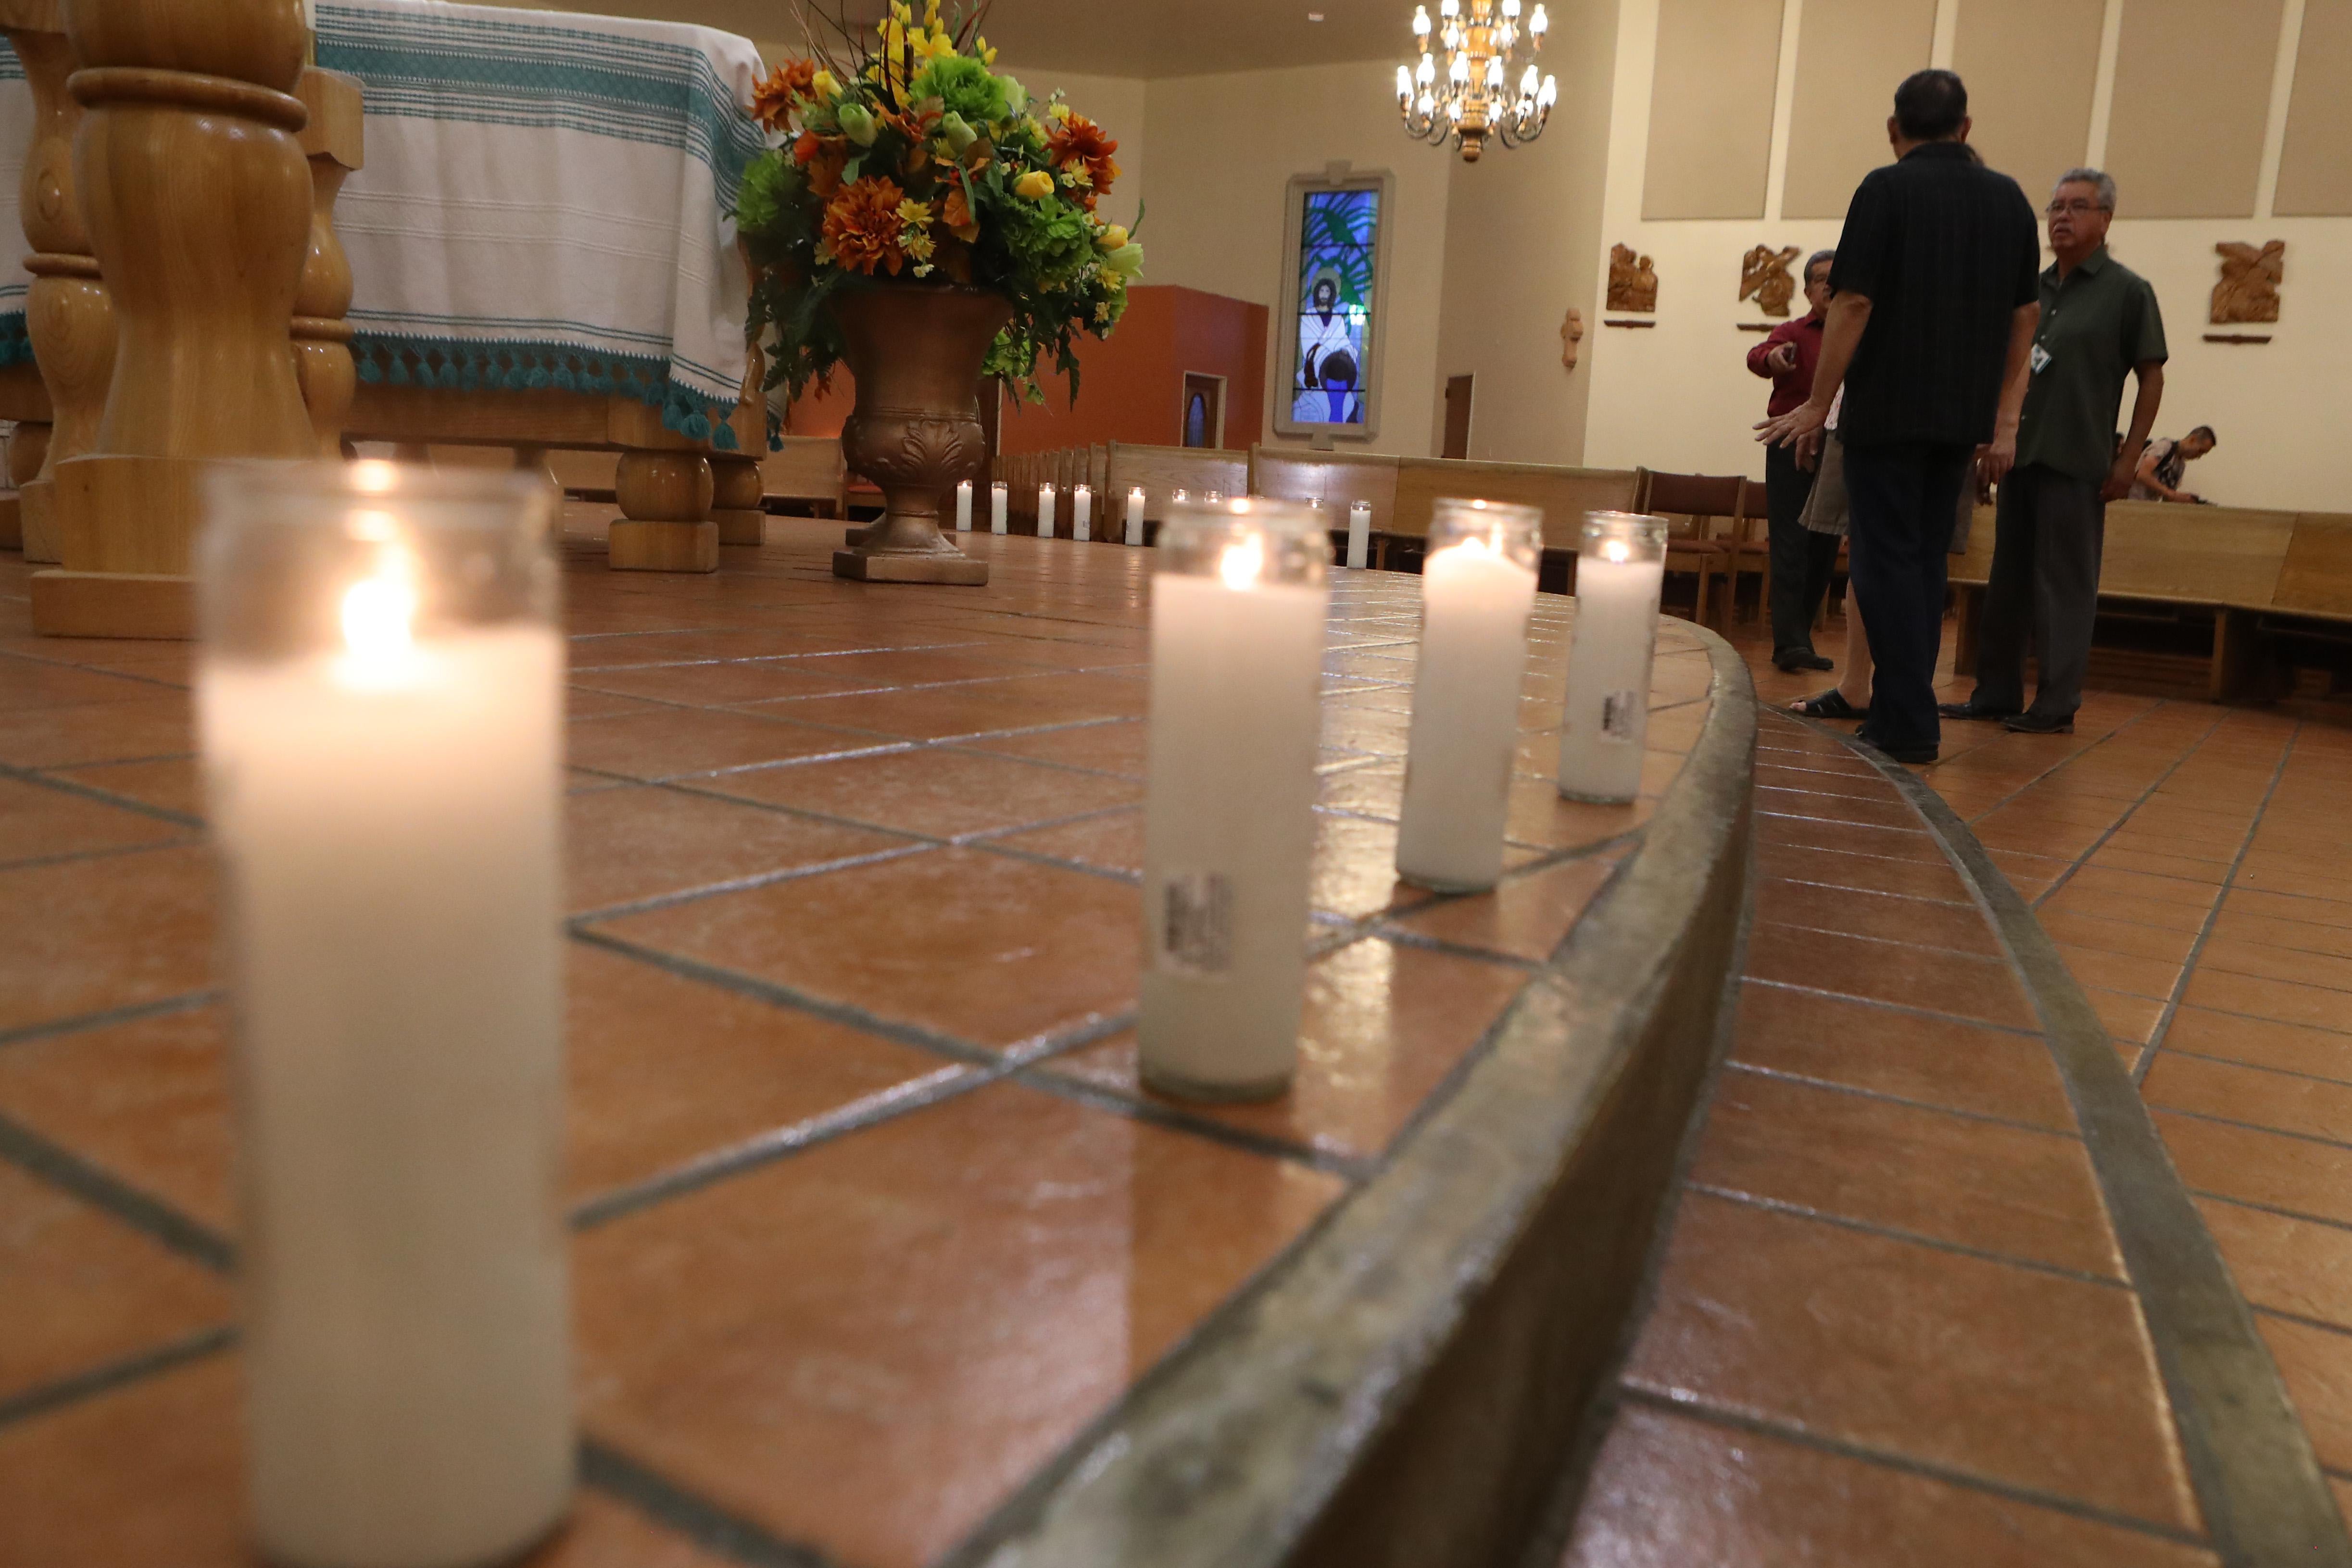 A row of candles on the floor of the church.